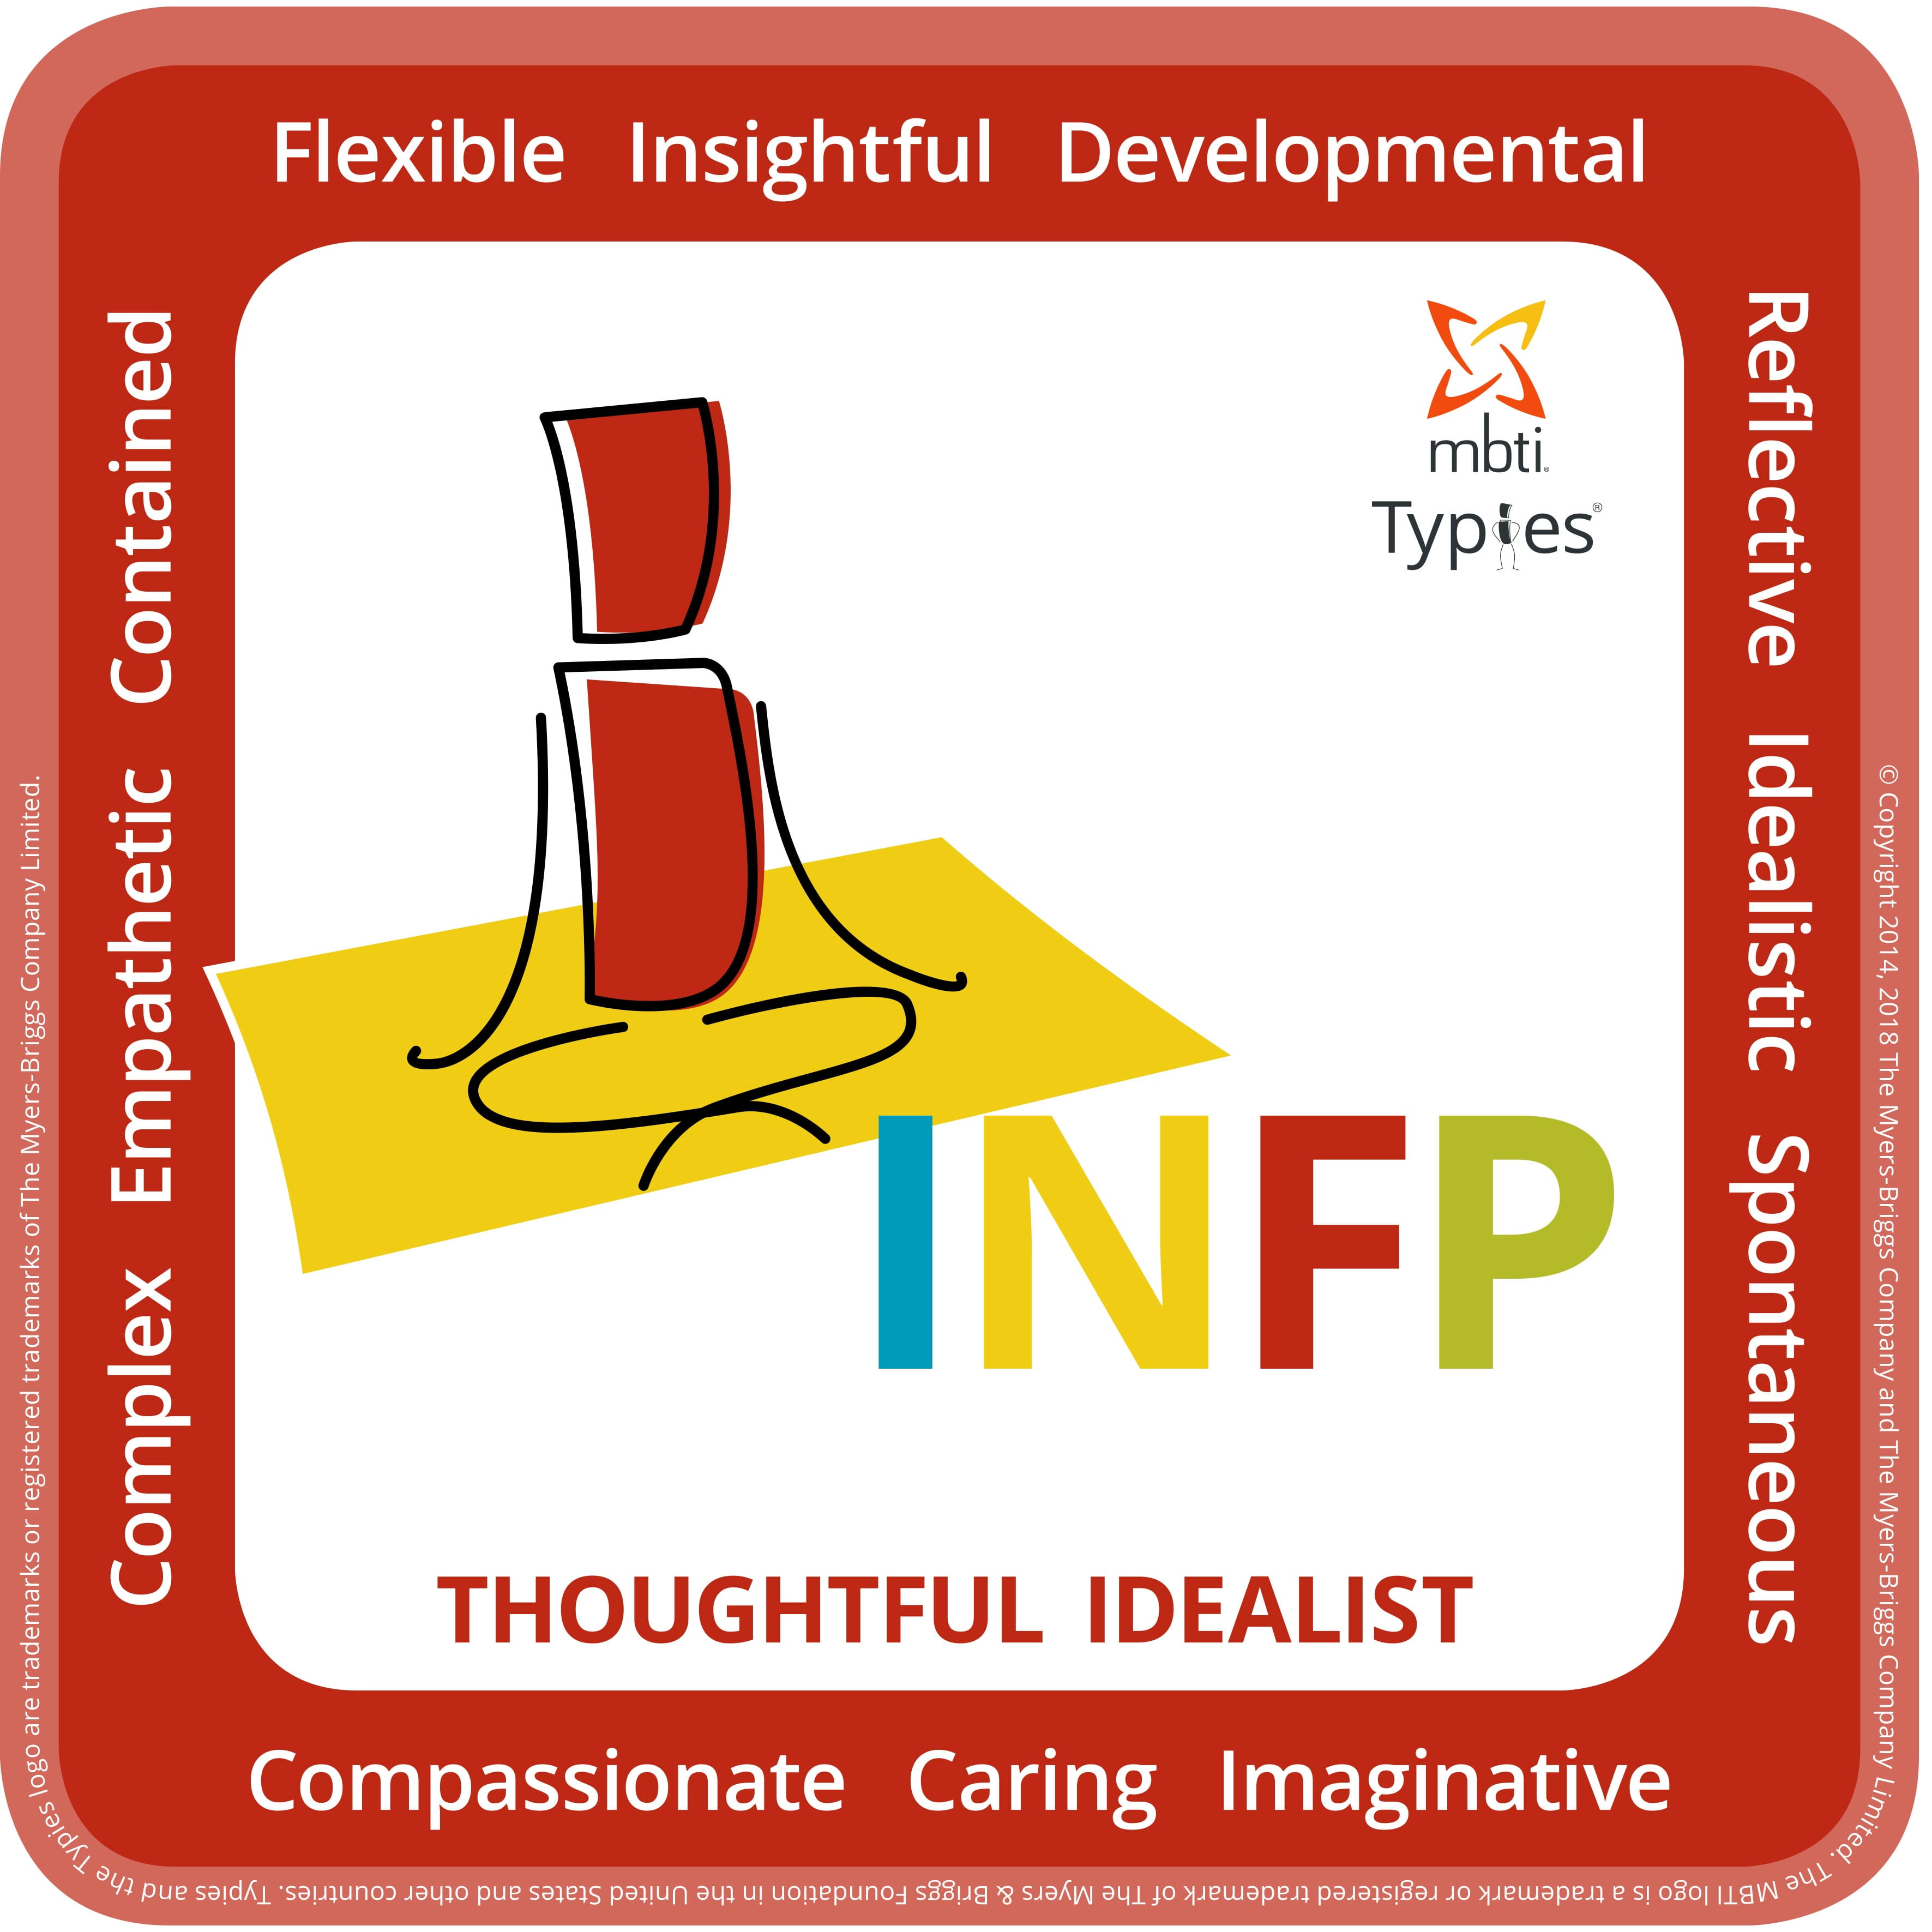 Typical characteristics of an INFP